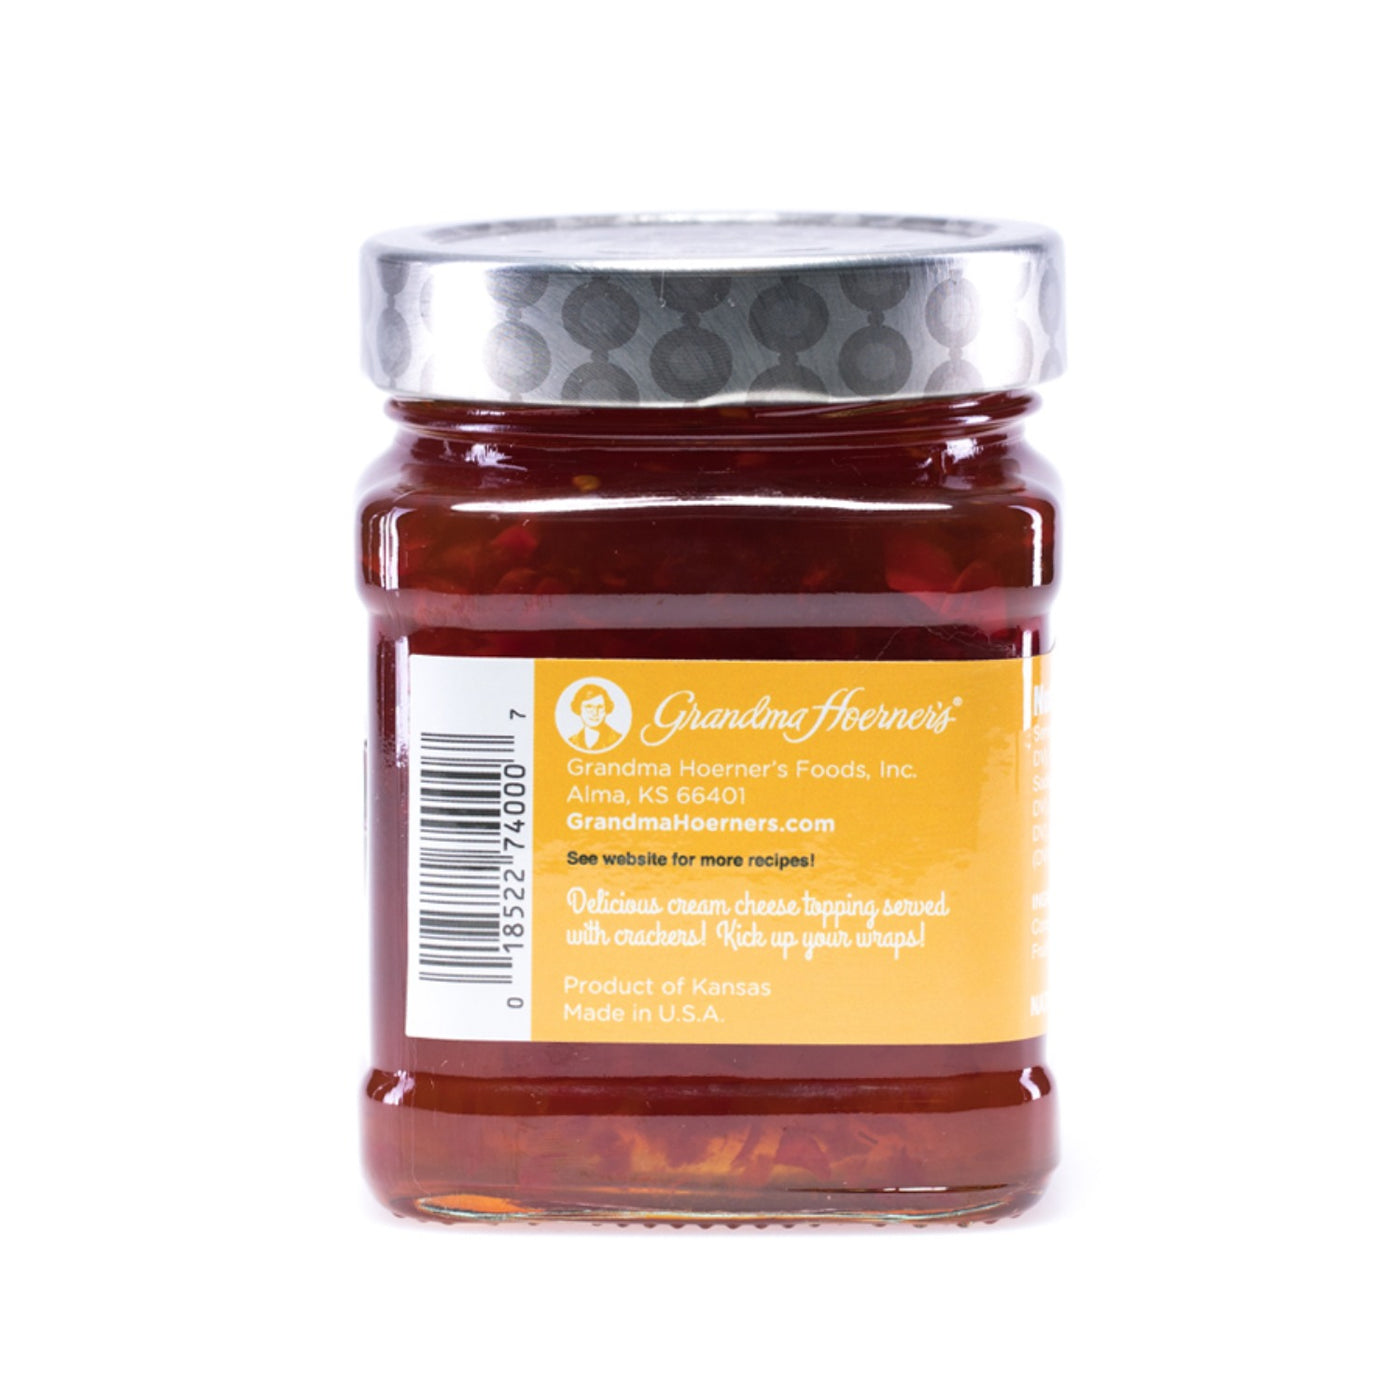 GH - Red Pepper Jelly